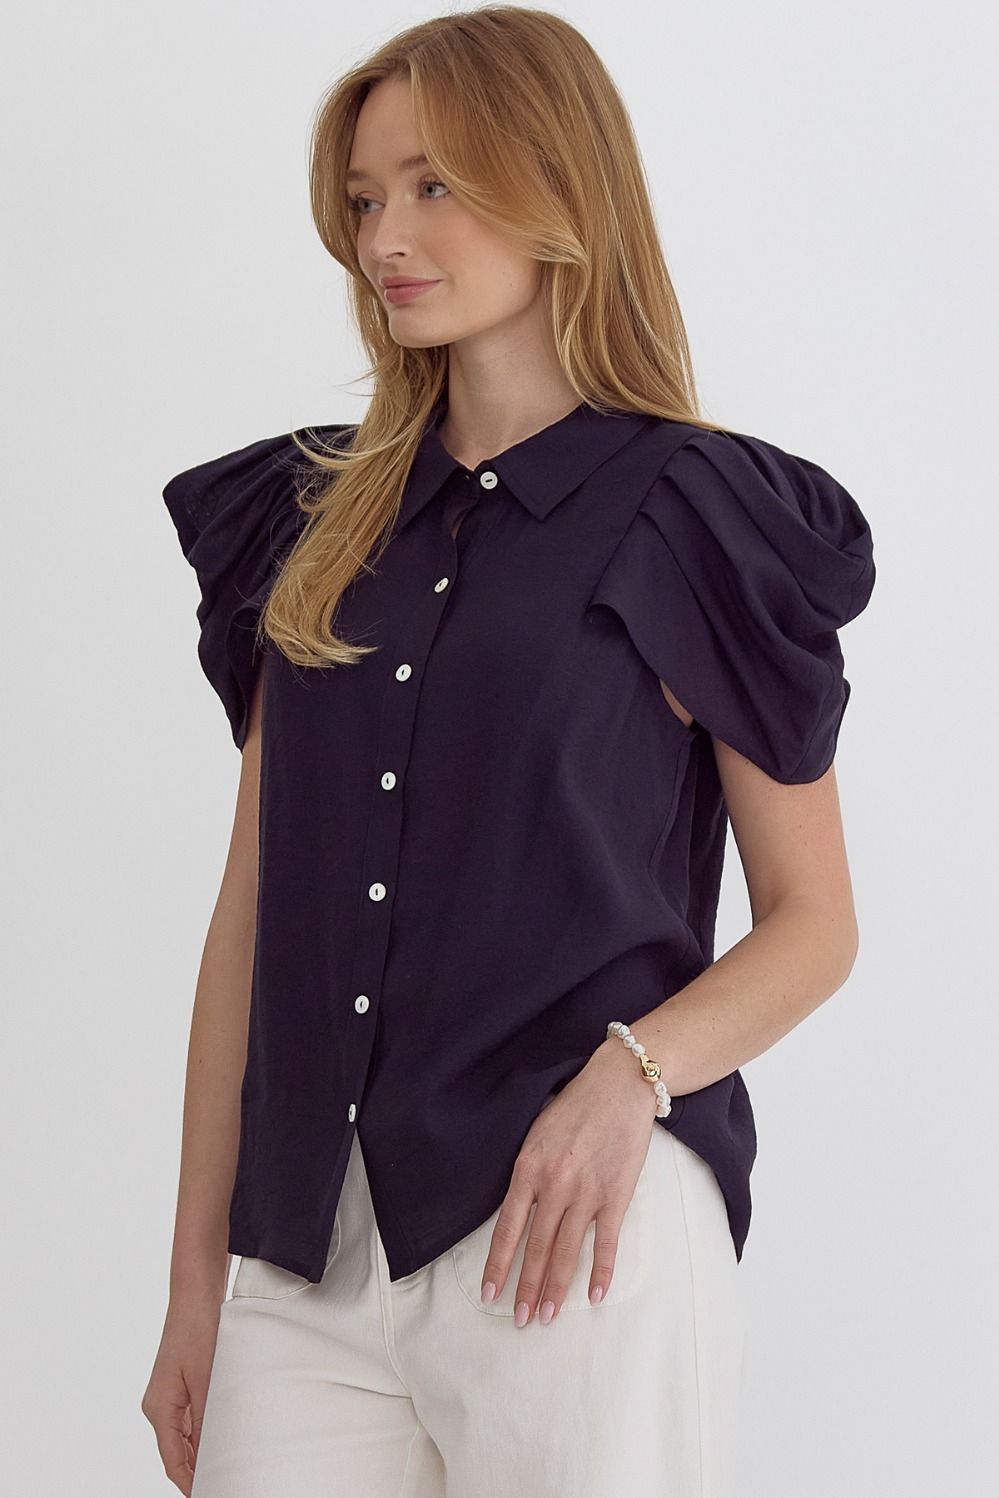 Navy Button Up Collared Top